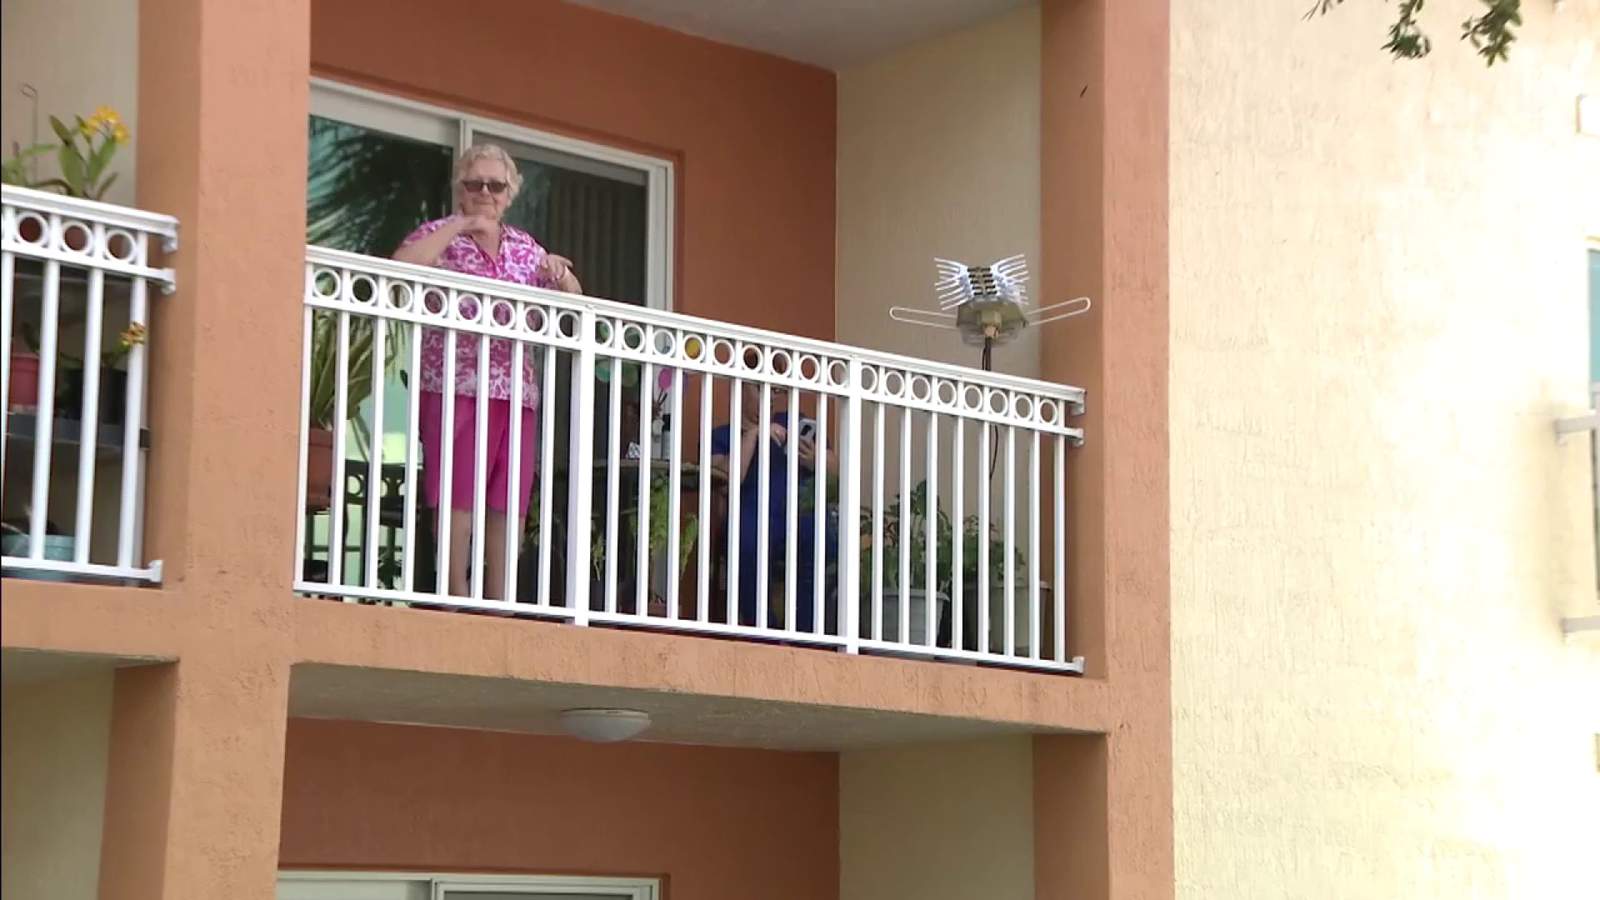 Coronavirus hot zone: Hialeah mayor asks residents to think about elderly during reopening